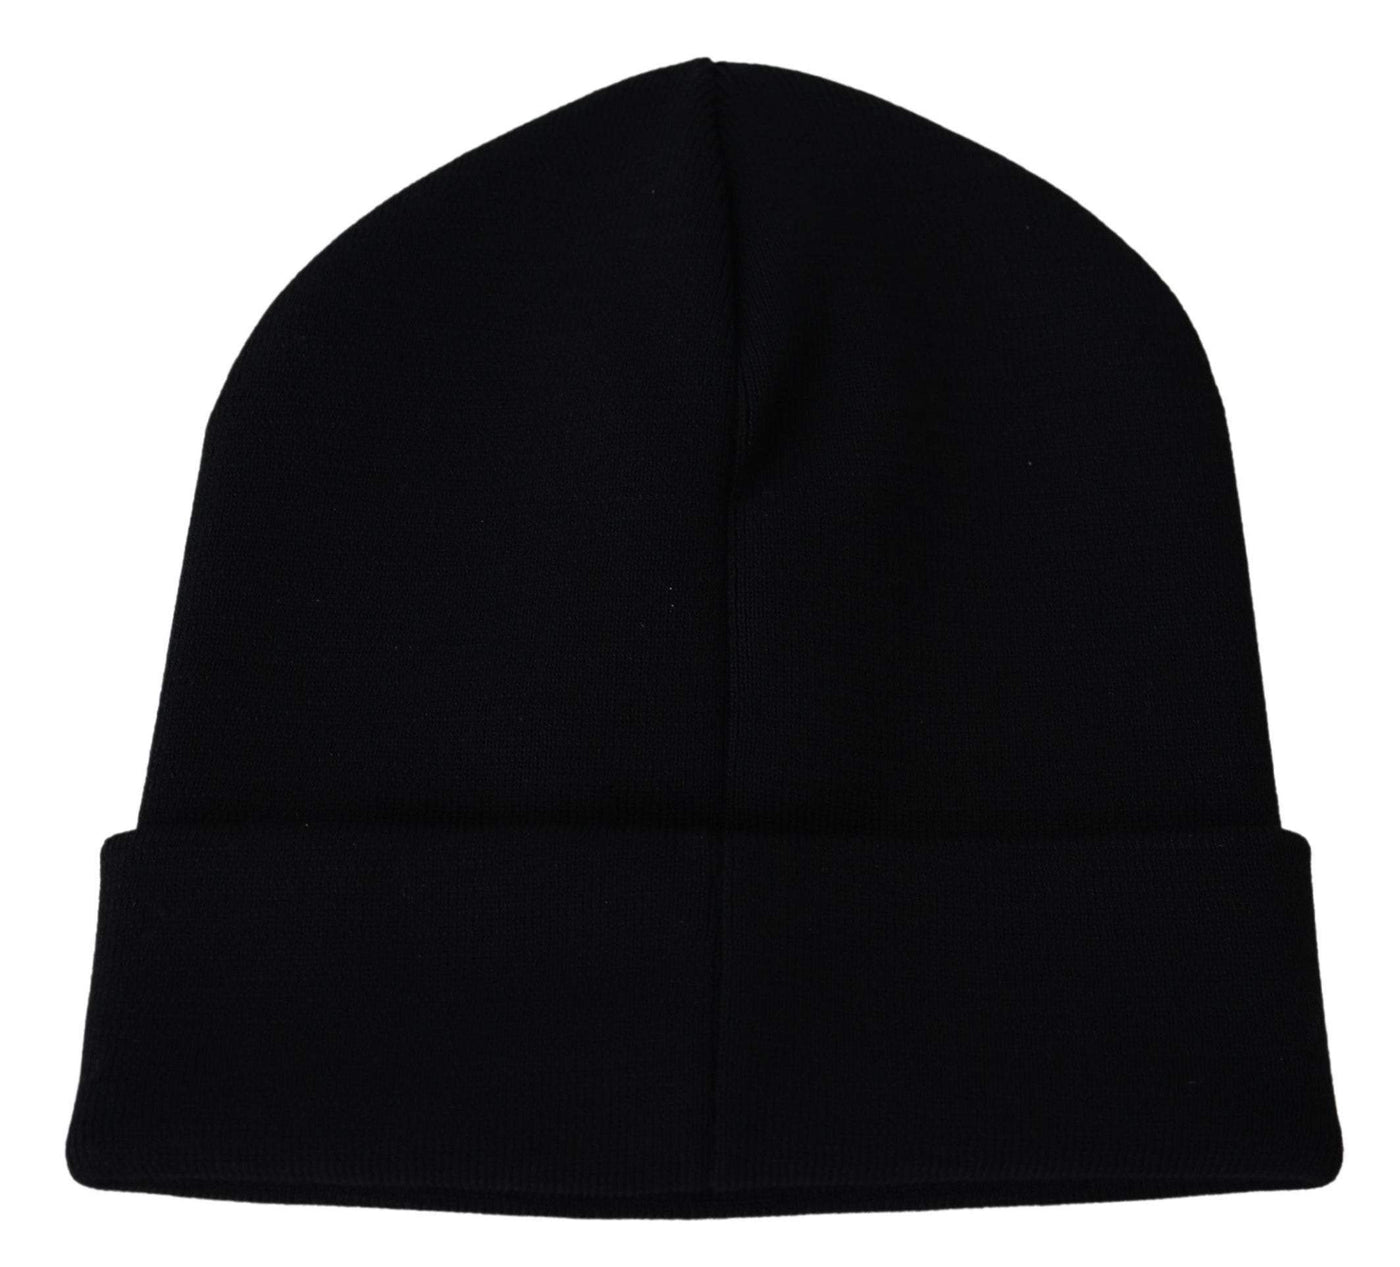 GIVENCHY Black Wool Unisex Winter Warm Beanie Hat #women, Accessories - New Arrivals, Black, feed-agegroup-adult, feed-color-black, feed-gender-female, feed-size-58 cm|M, feed-size-OS, Gender_Women, GIVENCHY, Hats & Caps - Men - Accessories, Hats - Women - Accessories at SEYMAYKA